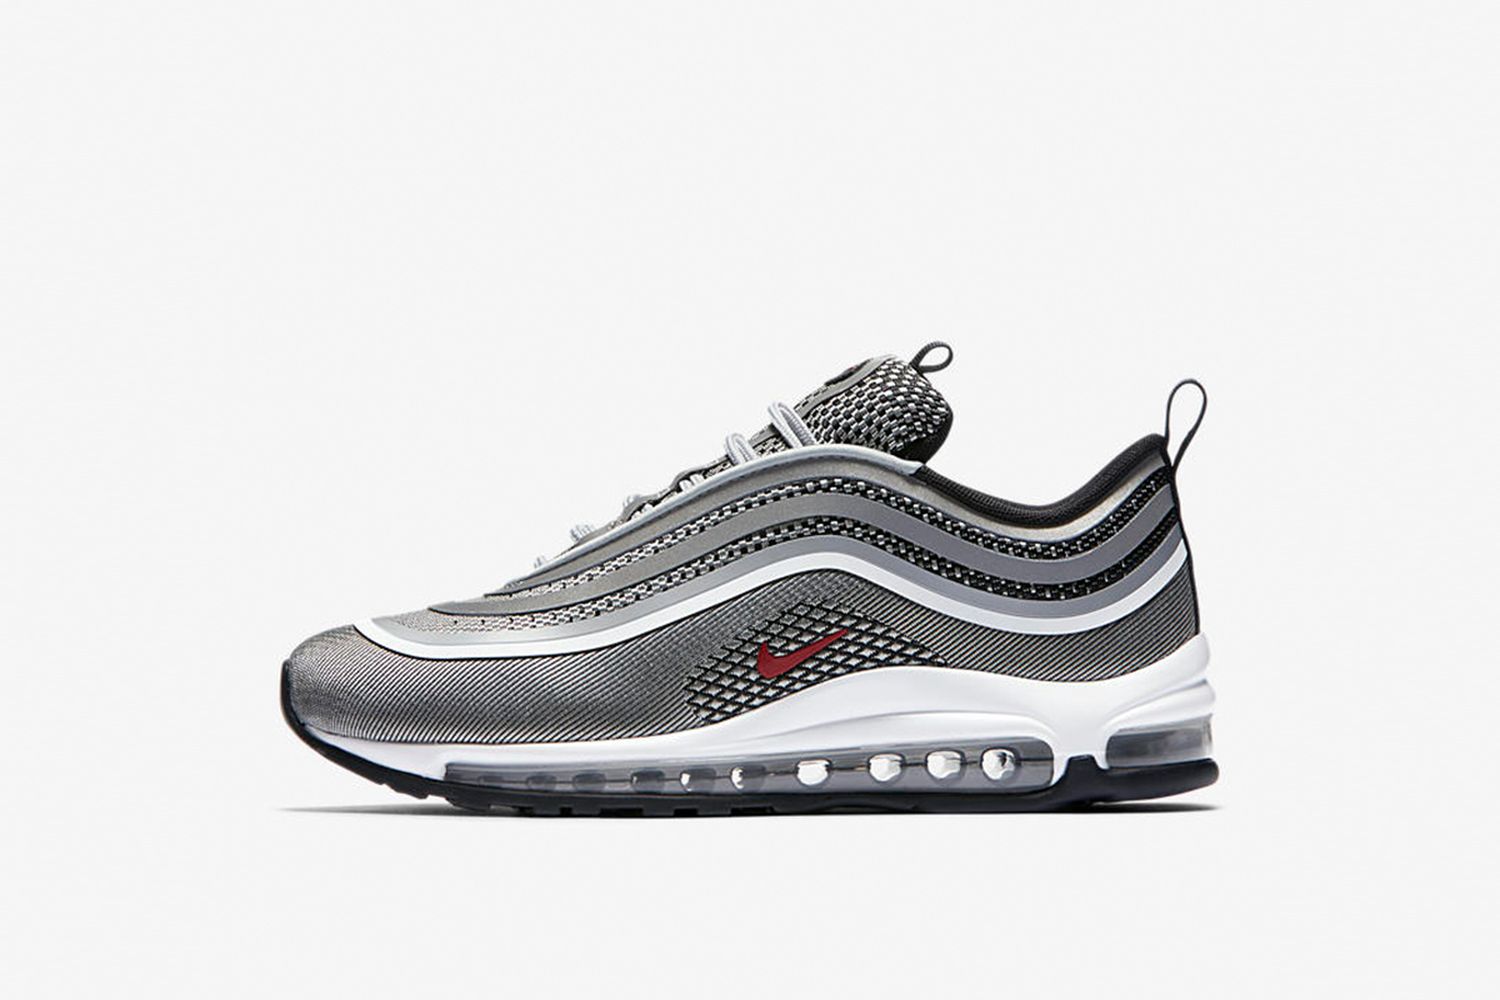 Here Are 9 Of The Best Nike Air Max 97 Sneakers To Buy Right Now